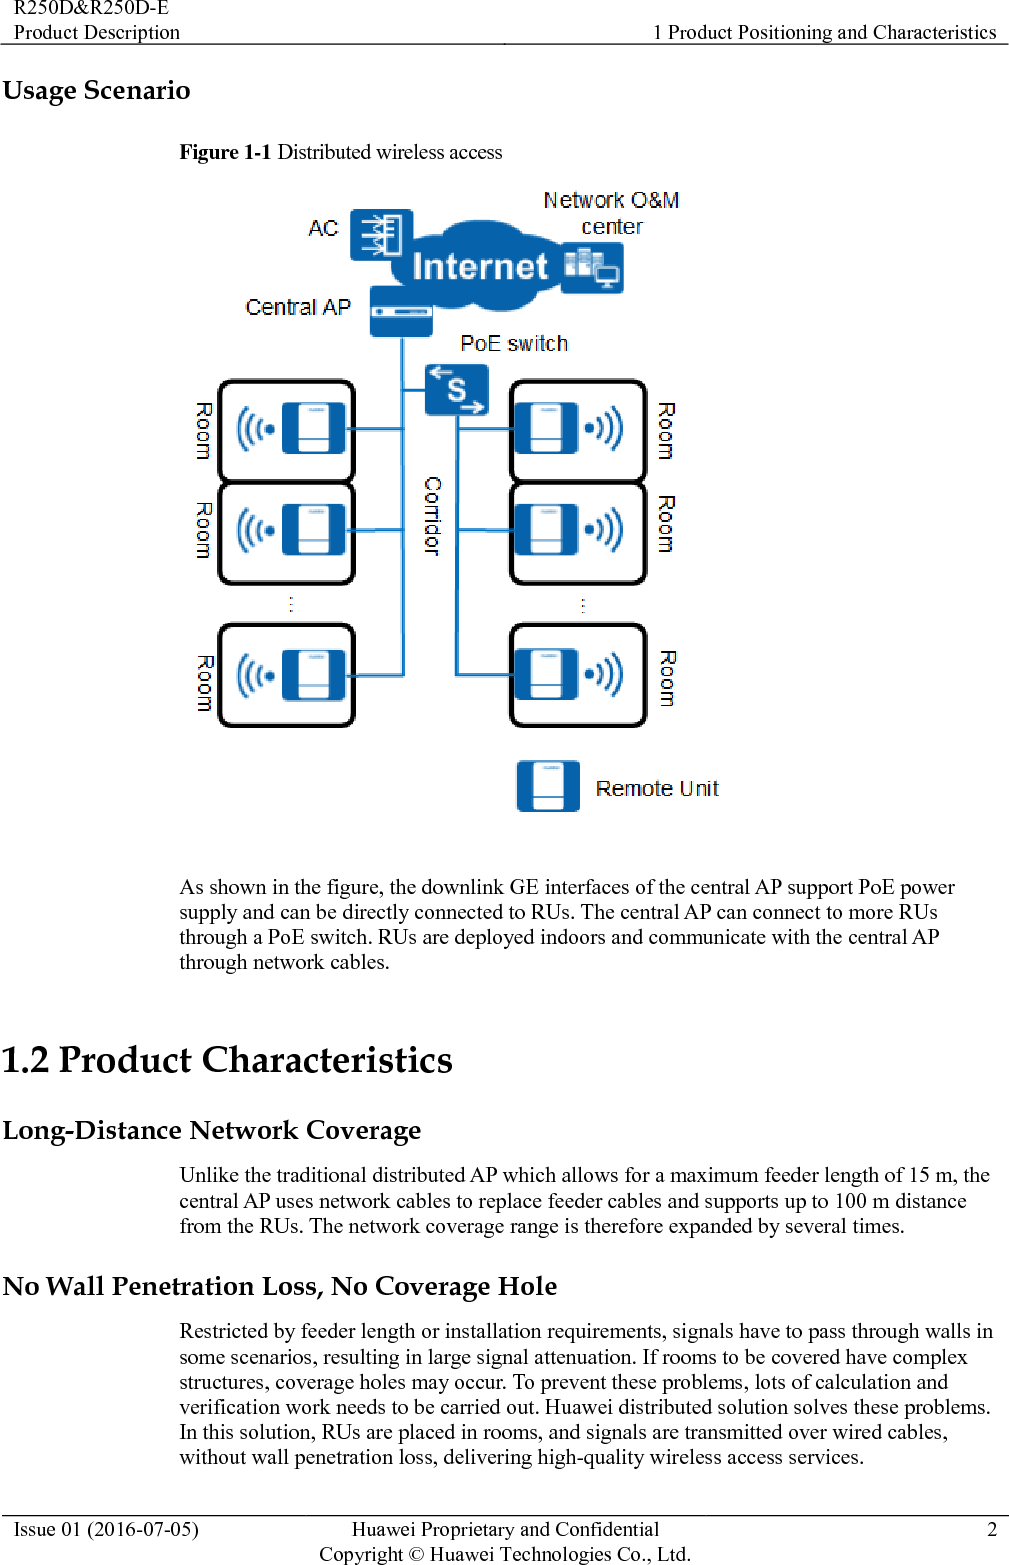 R250D&amp;R250D-E Product Description 1 Product Positioning and Characteristics  Issue 01 (2016-07-05) Huawei Proprietary and Confidential                                     Copyright © Huawei Technologies Co., Ltd. 2  Usage Scenario Figure 1-1 Distributed wireless access   As shown in the figure, the downlink GE interfaces of the central AP support PoE power supply and can be directly connected to RUs. The central AP can connect to more RUs through a PoE switch. RUs are deployed indoors and communicate with the central AP through network cables. 1.2 Product Characteristics Long-Distance Network Coverage Unlike the traditional distributed AP which allows for a maximum feeder length of 15 m, the central AP uses network cables to replace feeder cables and supports up to 100 m distance from the RUs. The network coverage range is therefore expanded by several times. No Wall Penetration Loss, No Coverage Hole Restricted by feeder length or installation requirements, signals have to pass through walls in some scenarios, resulting in large signal attenuation. If rooms to be covered have complex structures, coverage holes may occur. To prevent these problems, lots of calculation and verification work needs to be carried out. Huawei distributed solution solves these problems. In this solution, RUs are placed in rooms, and signals are transmitted over wired cables, without wall penetration loss, delivering high-quality wireless access services. 